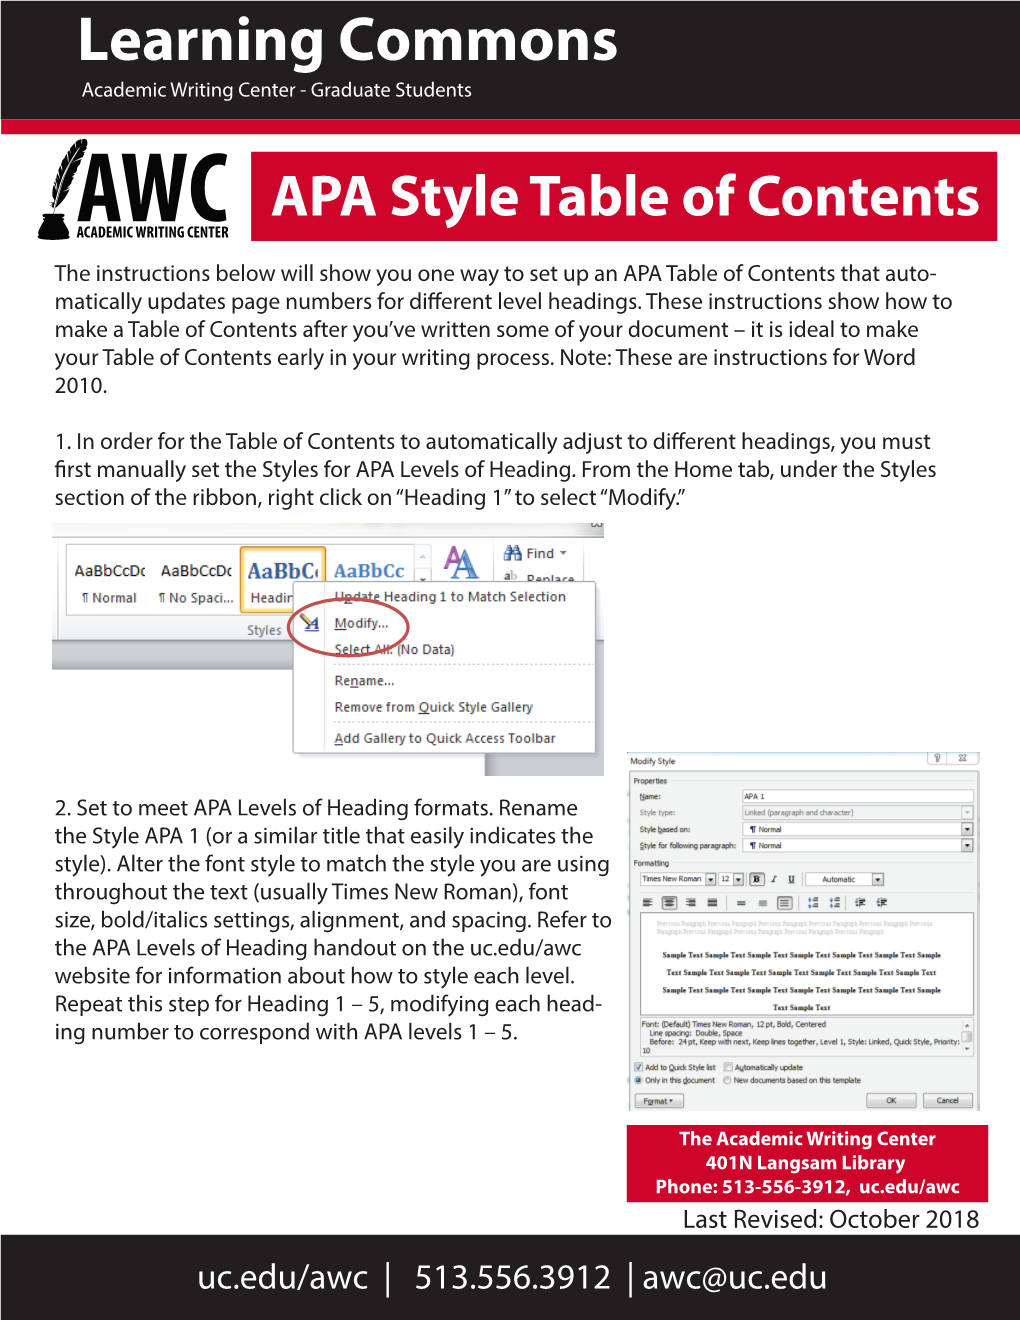 APA Style Table of Contents